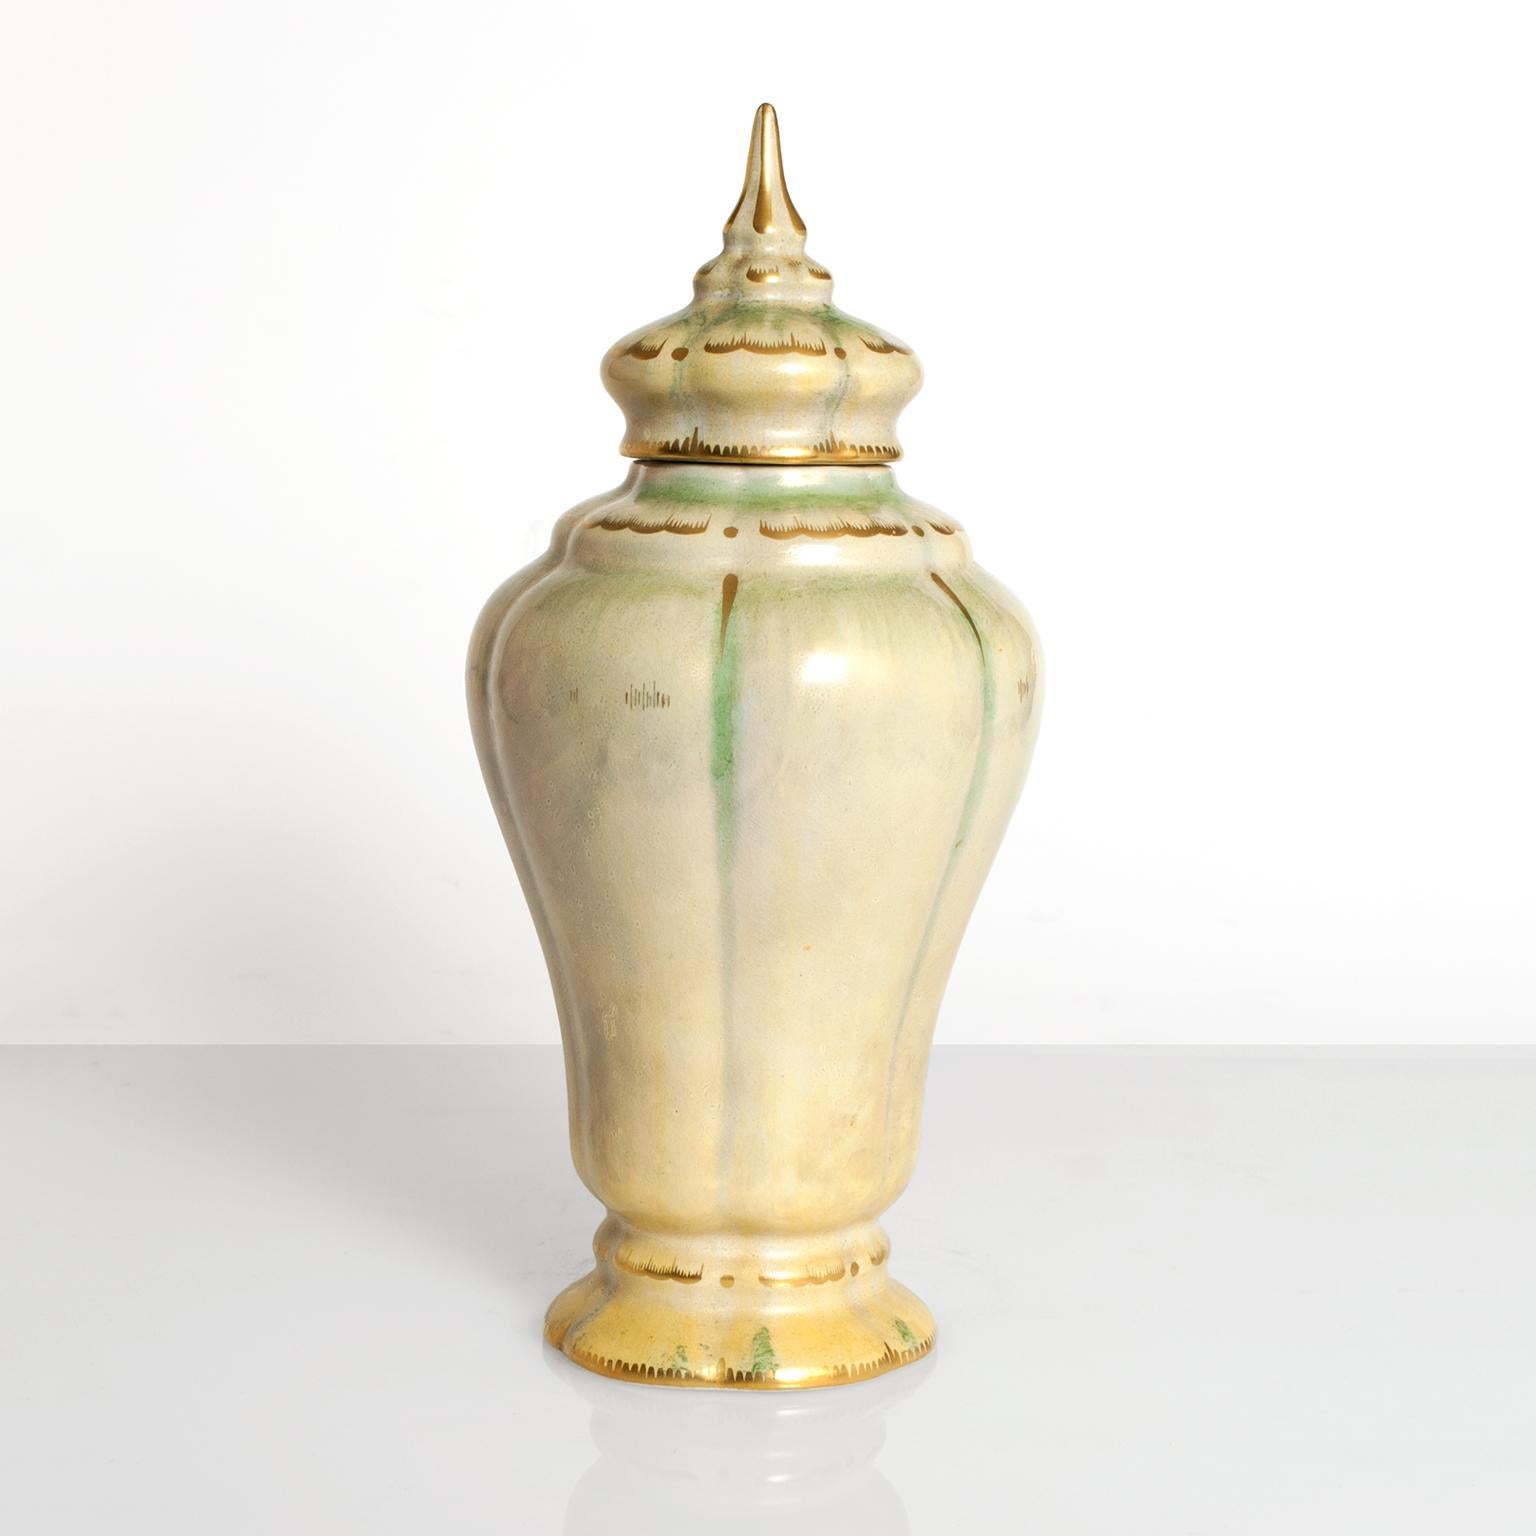 Swedish Art Deco, hand decorated ceramic vase with lid from Gustavsberg. Designed and signed by Josef Ekberg, 1920s, in pale green-yellow luster glaze with details in gold.
 
Measures: Diameter 6